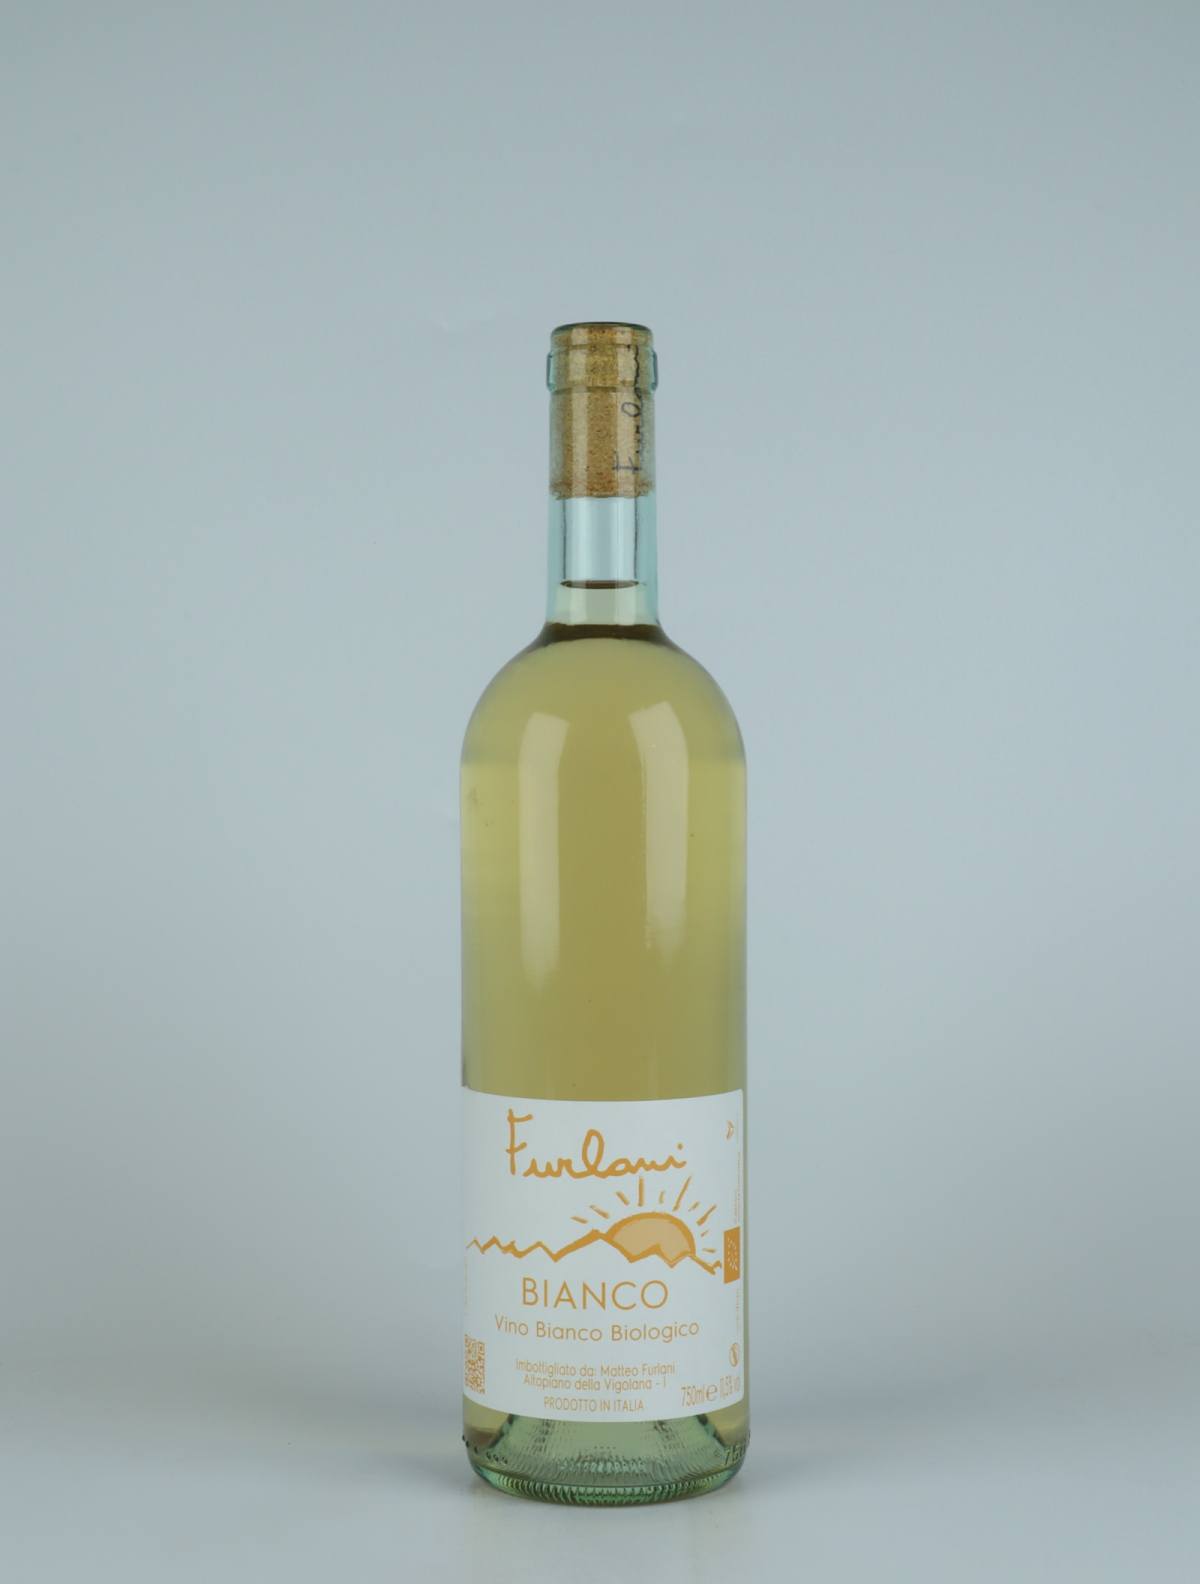 A bottle 2021 Bianco White wine from Cantina Furlani, Alto Adige in Italy